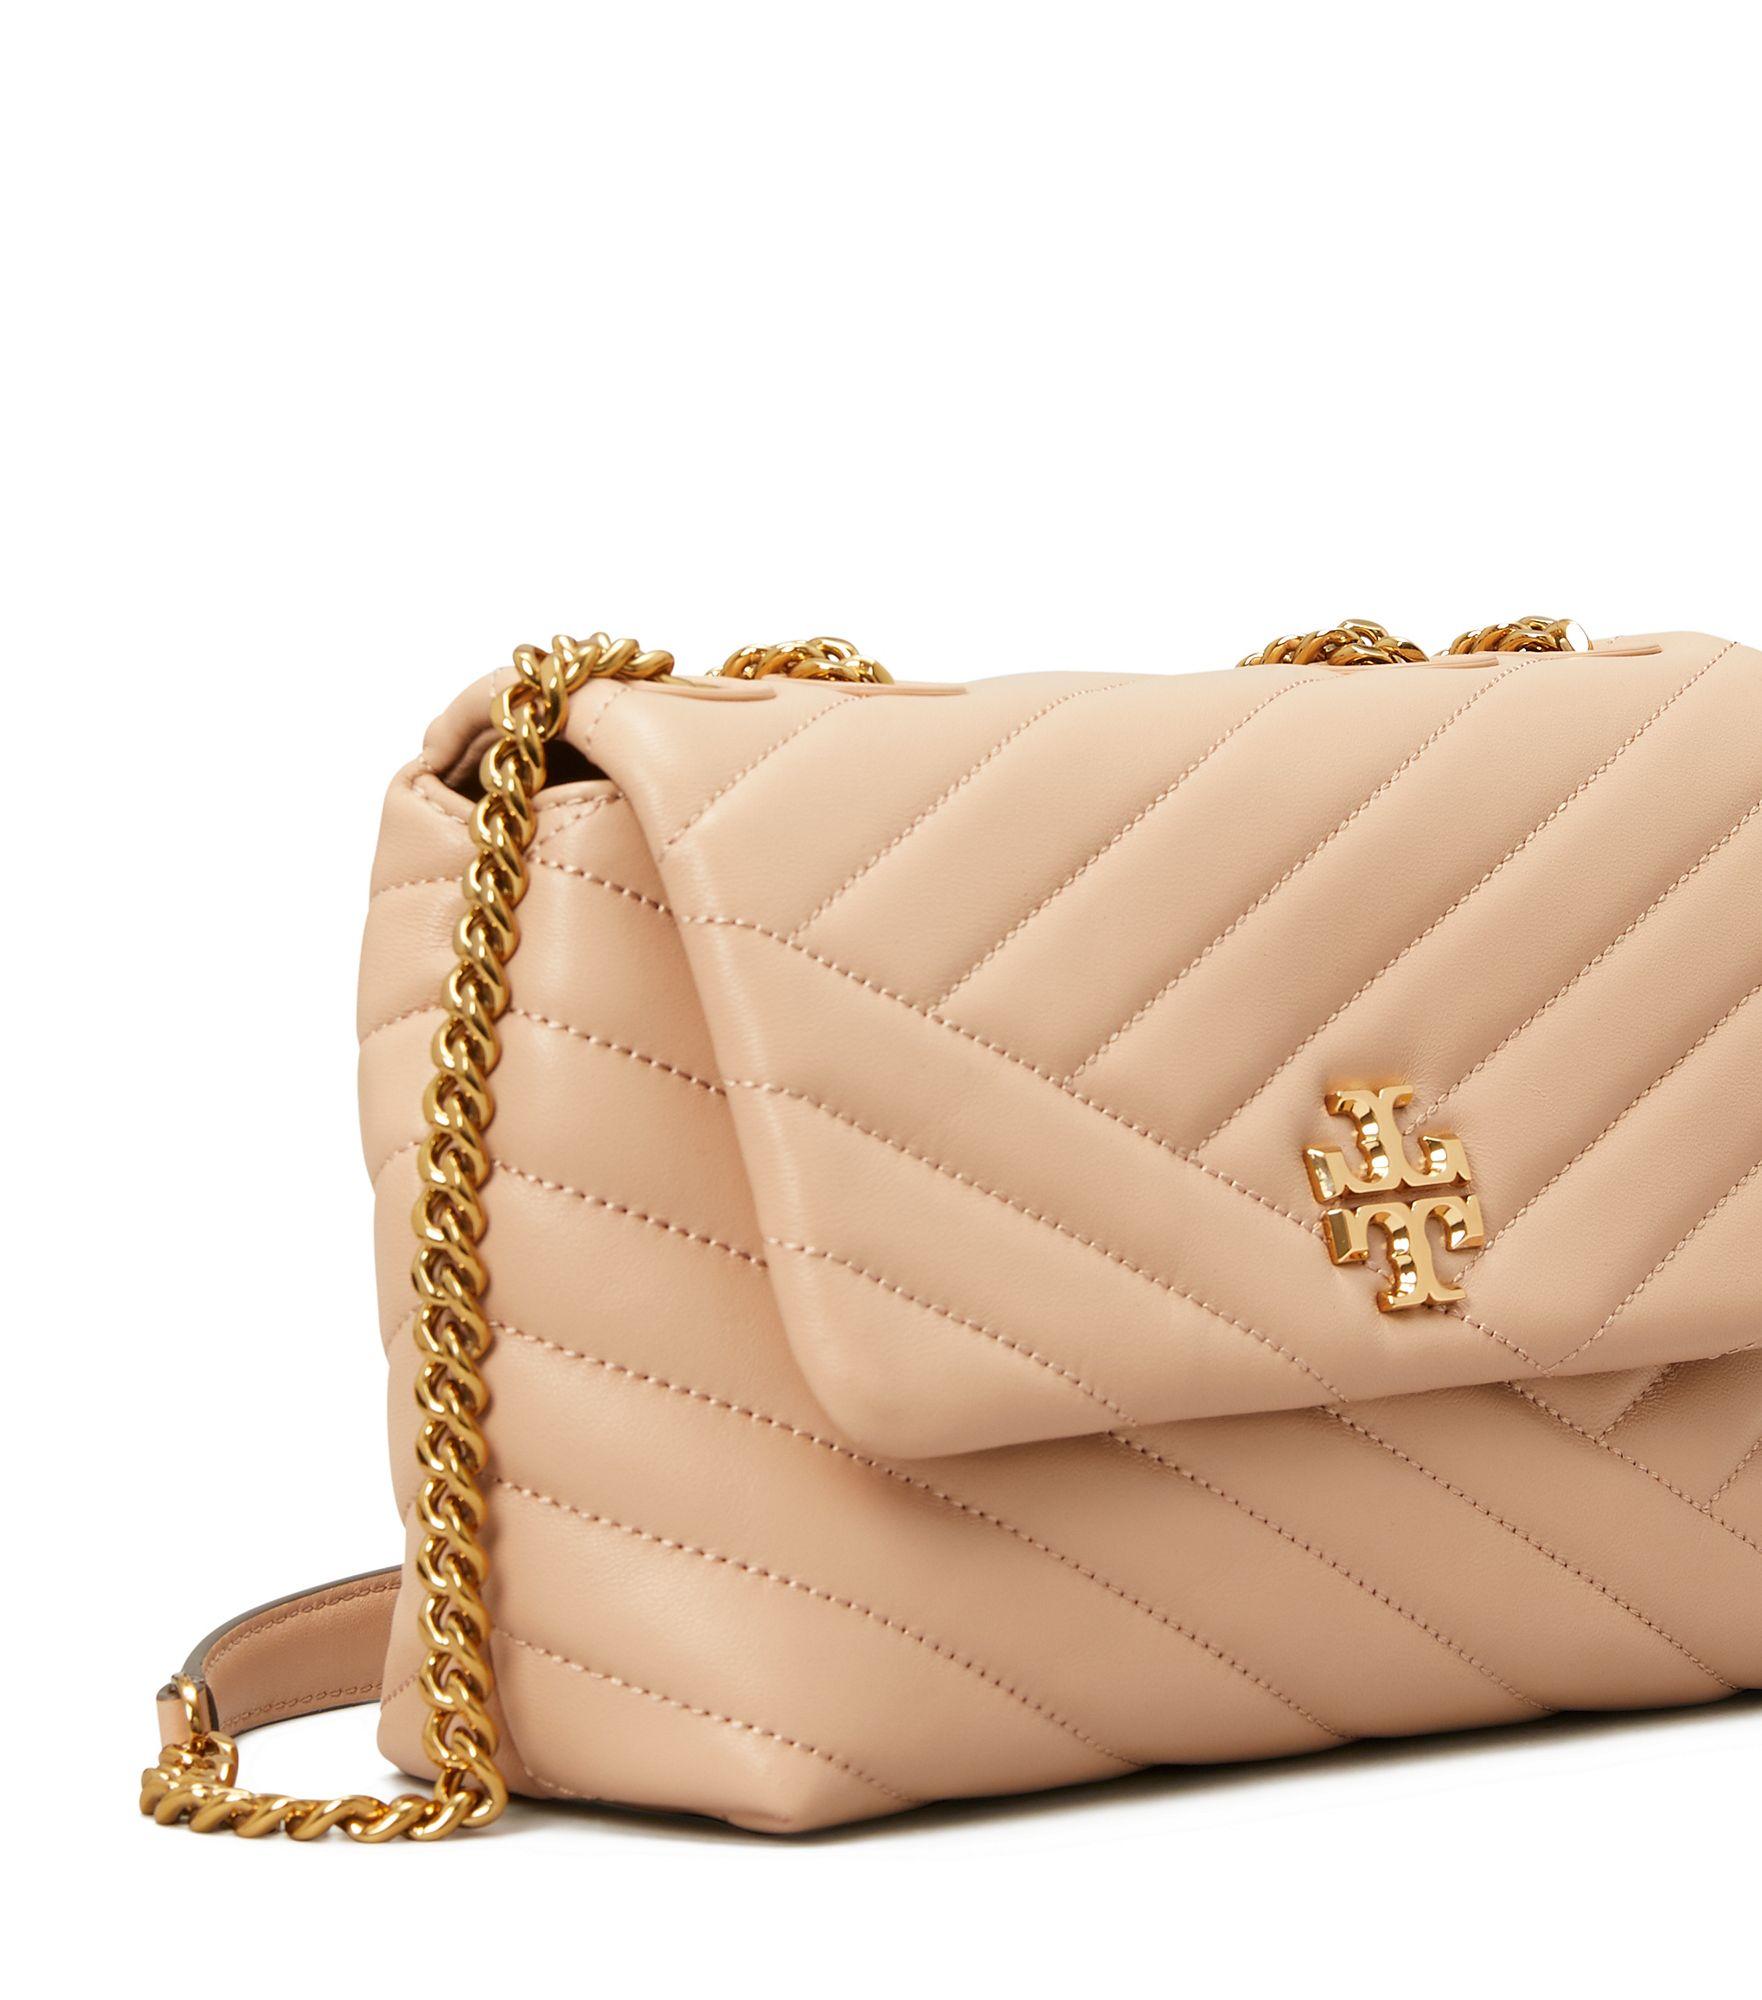 Tory Burch Leather Kira Chevron Small Convertible Shoulder Bag in Beige